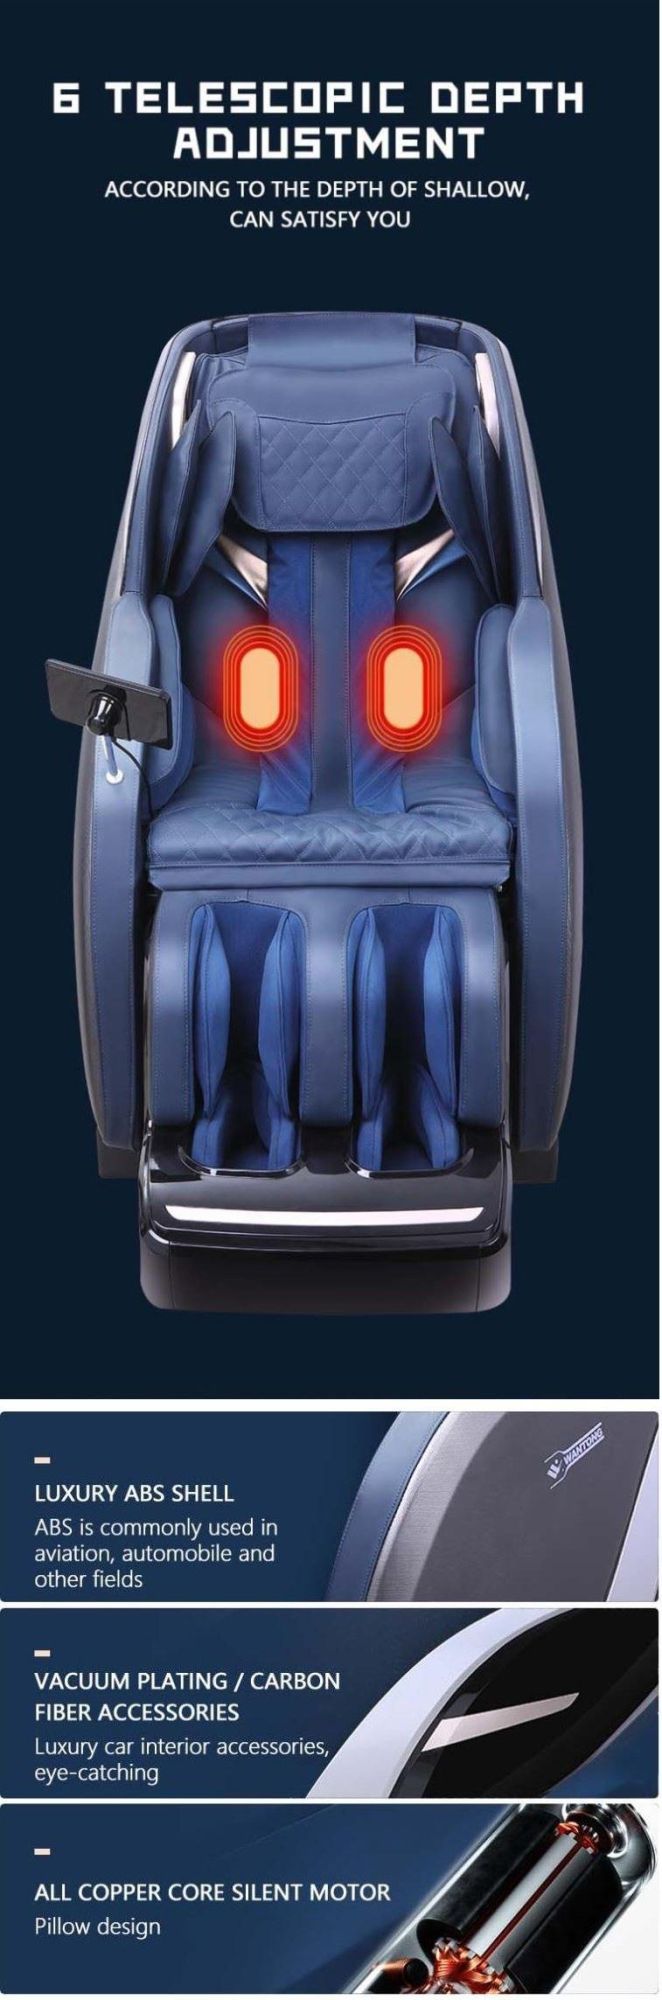 2021 New Space Capsule Zero Gravity Wireless Massage Chair with Heating Function